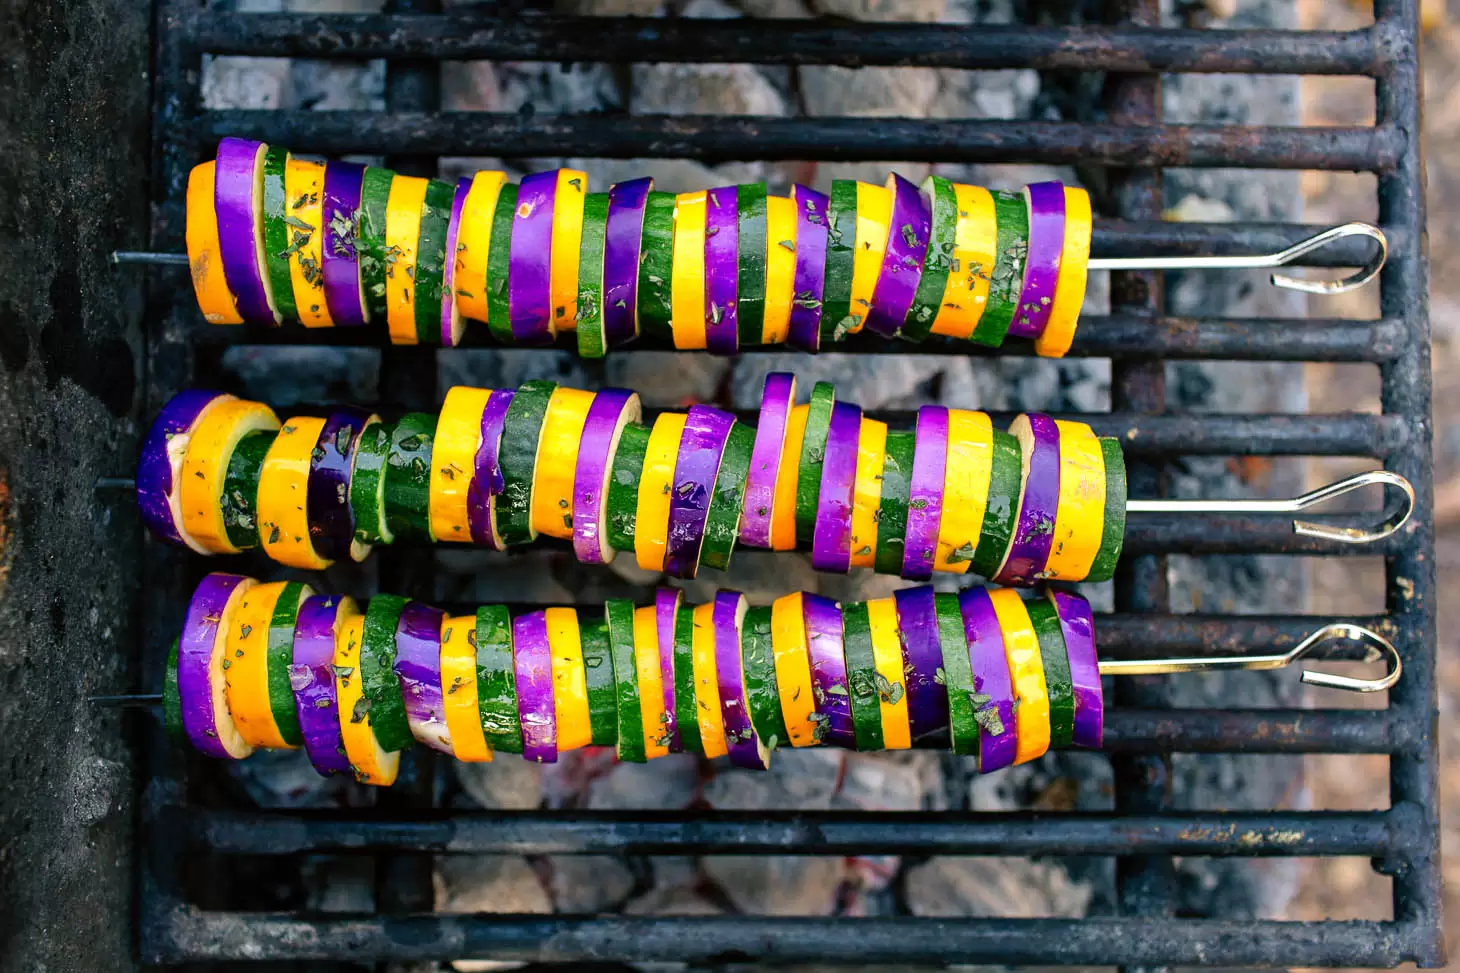 Ratatouille kabobs grilling over a campfire.